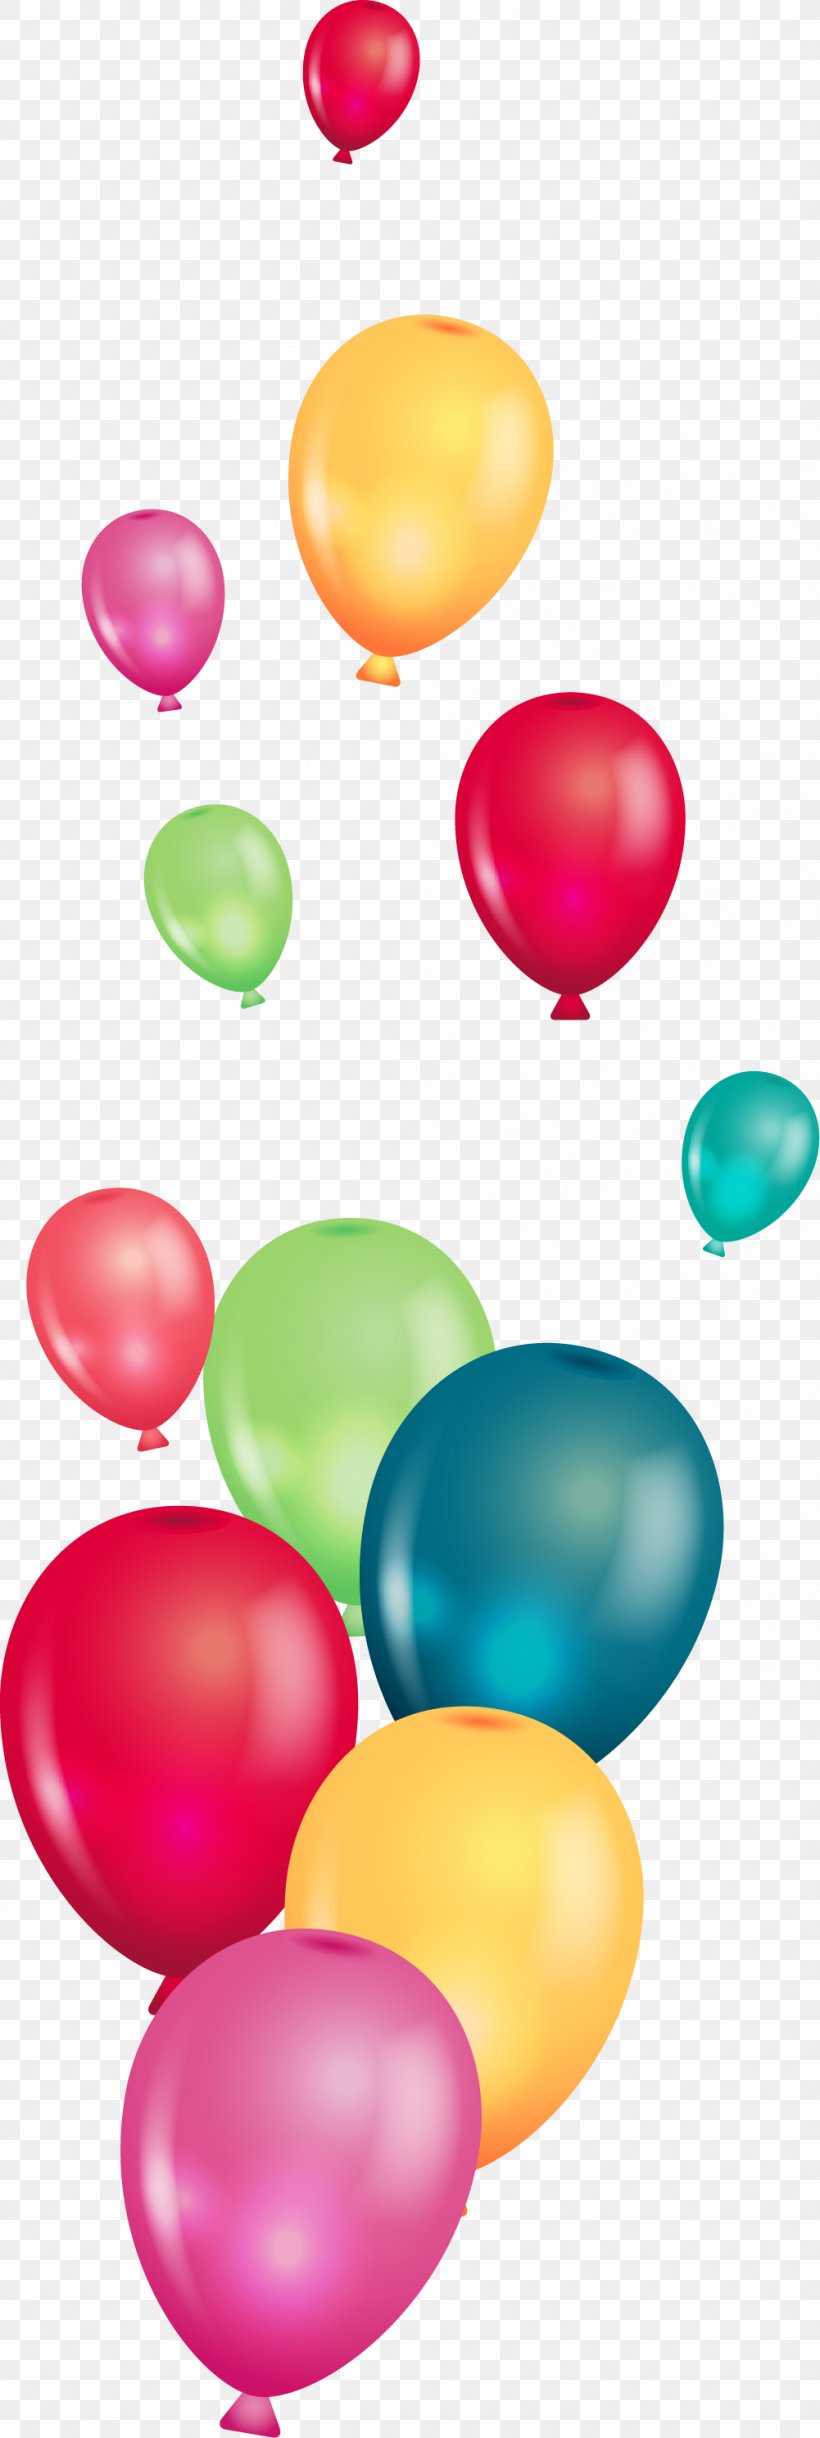 Balloon Gratis, PNG, 1001x2977px, Balloon, Cartoon, Color, Easter Egg, Google Images Download Free